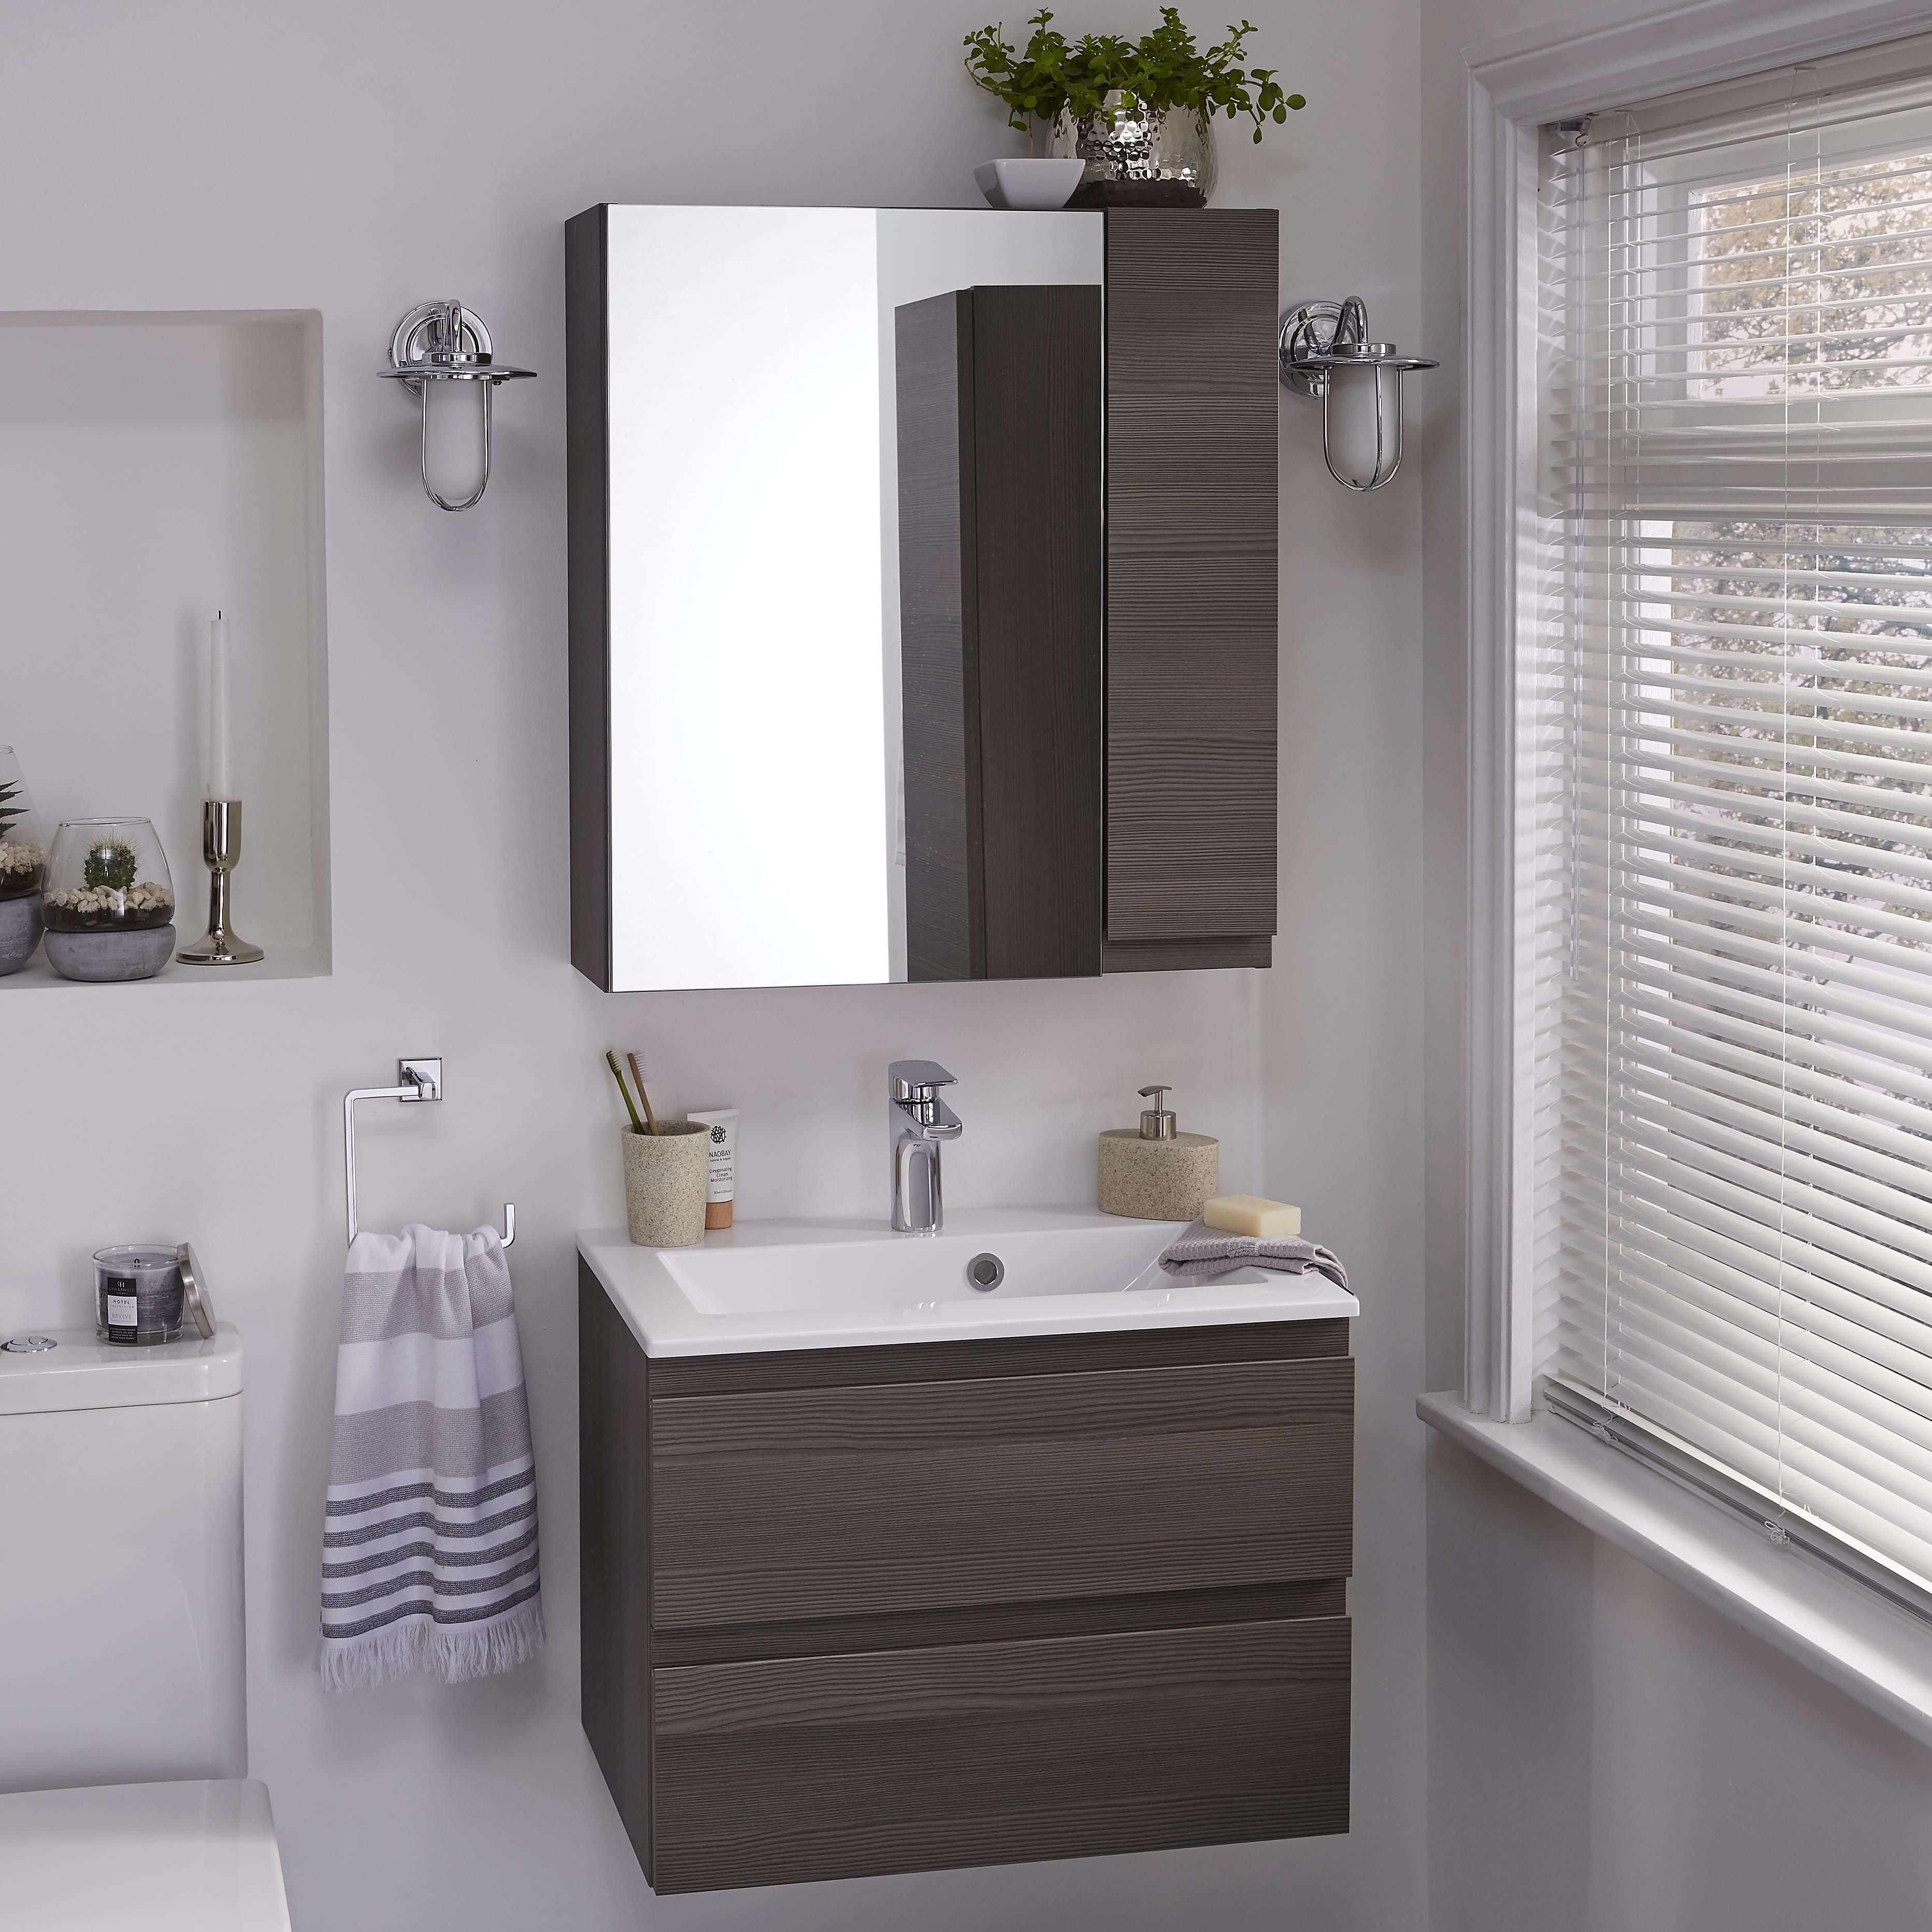 15+ Clever Small Bathroom Cabinet Ideas